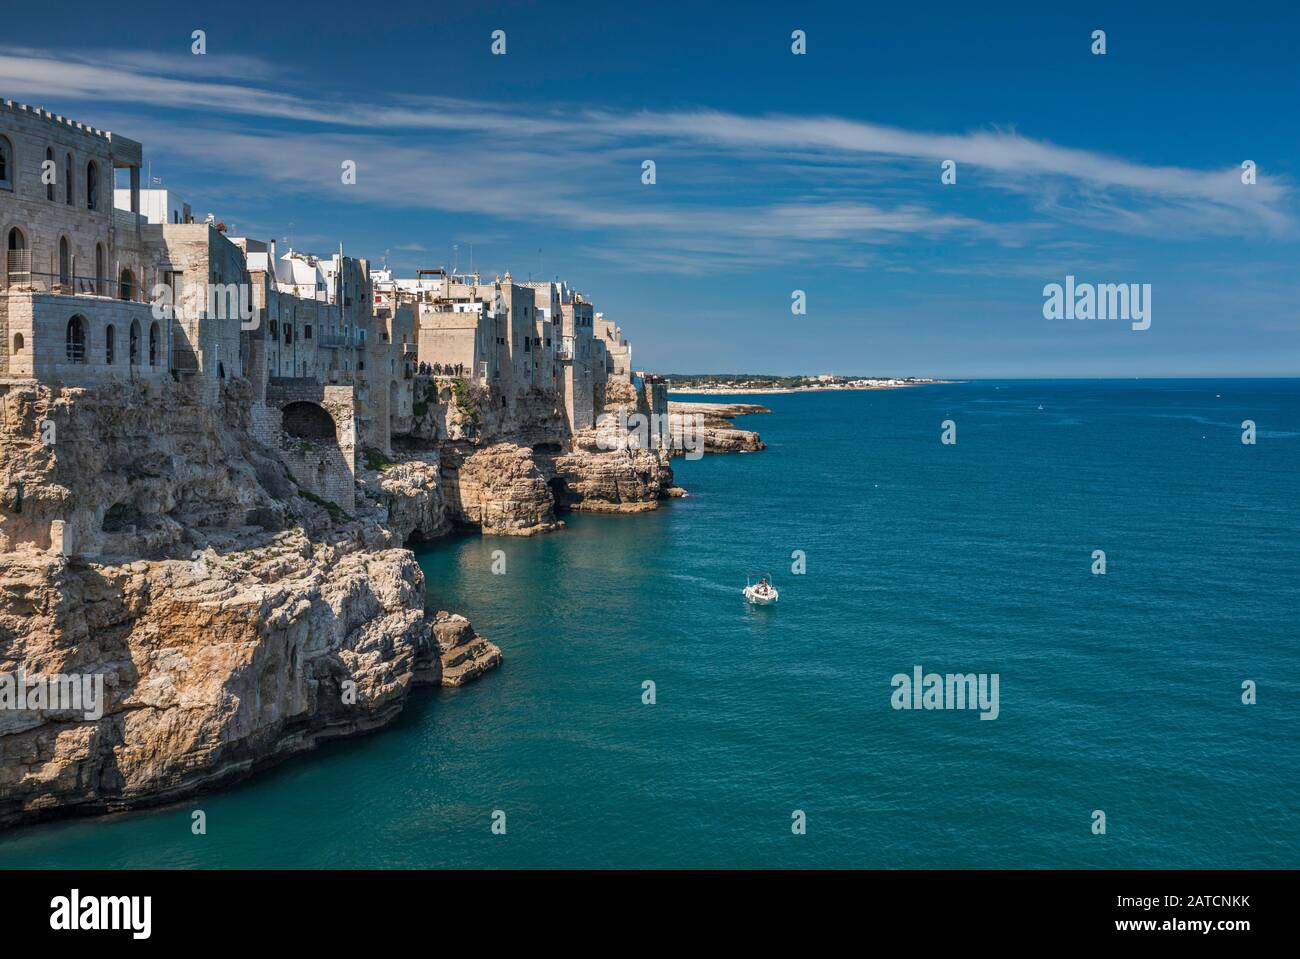 Houses on rocks above Adriatic Sea, from Largo Ardito viewpoint, in Polignano a Mare, Apulia, Italy Stock Photo